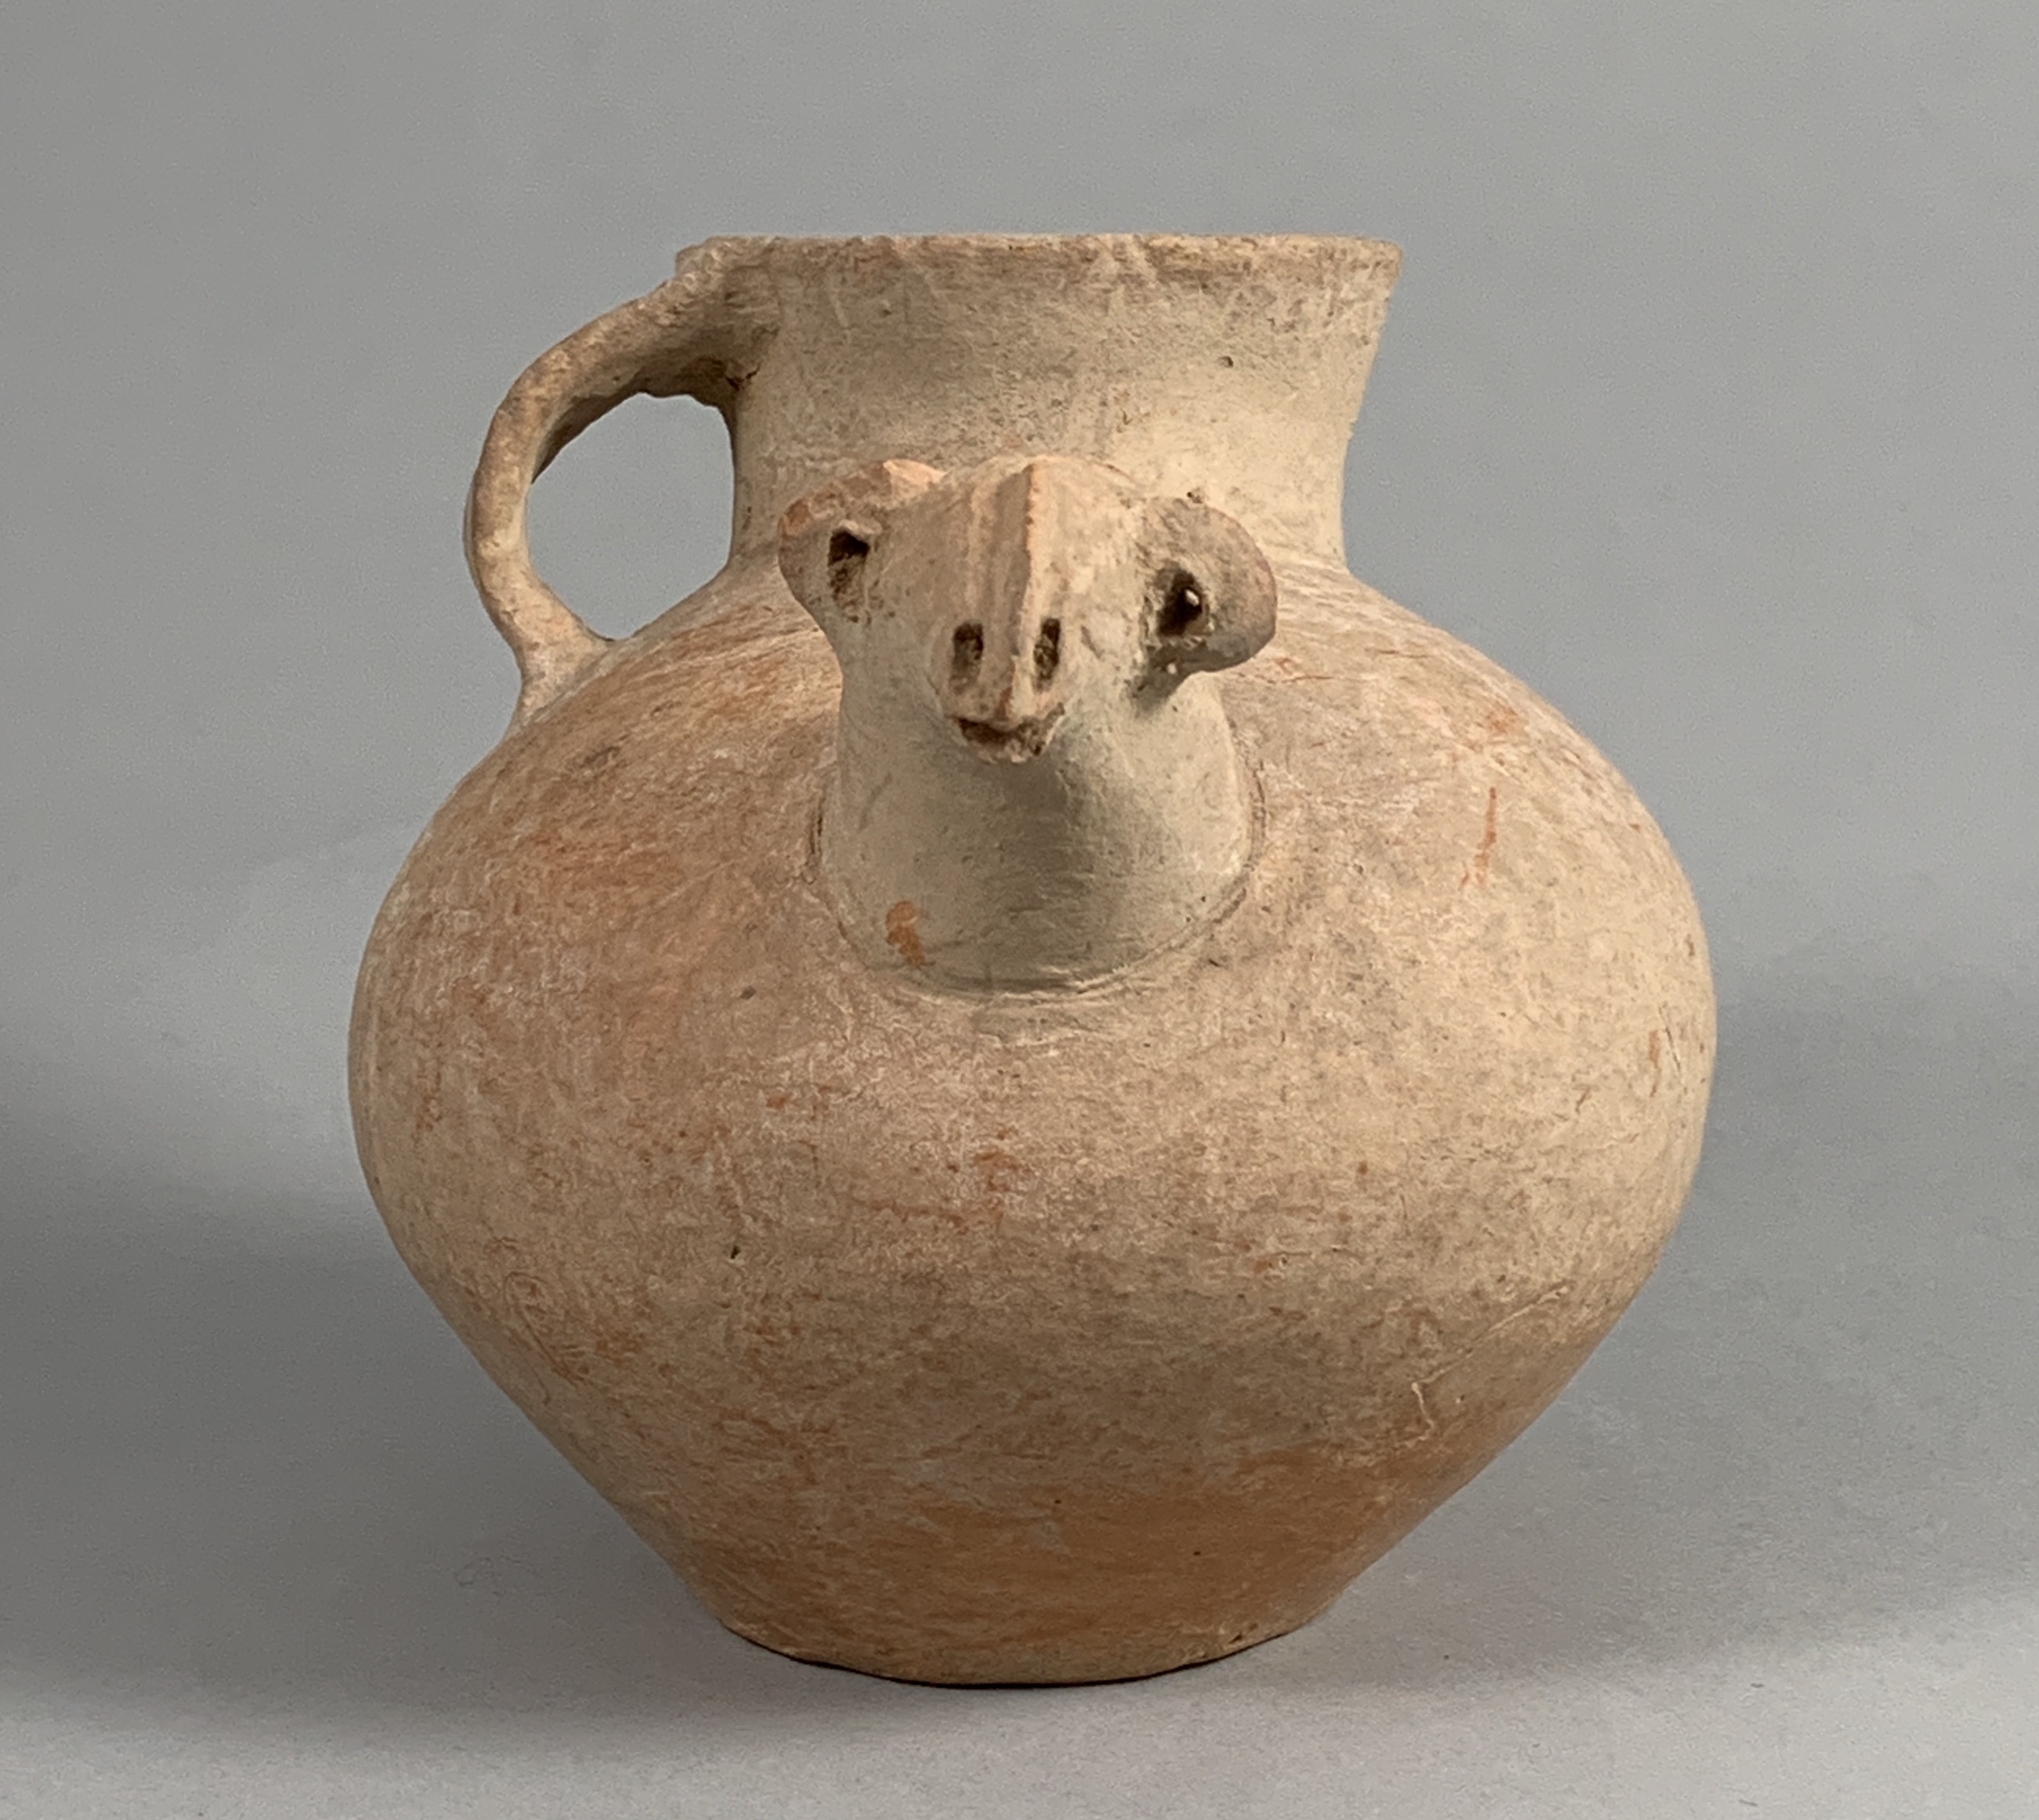 A Red Pottery Vase With Ram’s Head Handle, Gansu Province, Qijia Culture (2050-1700 Bc) - Image 4 of 15